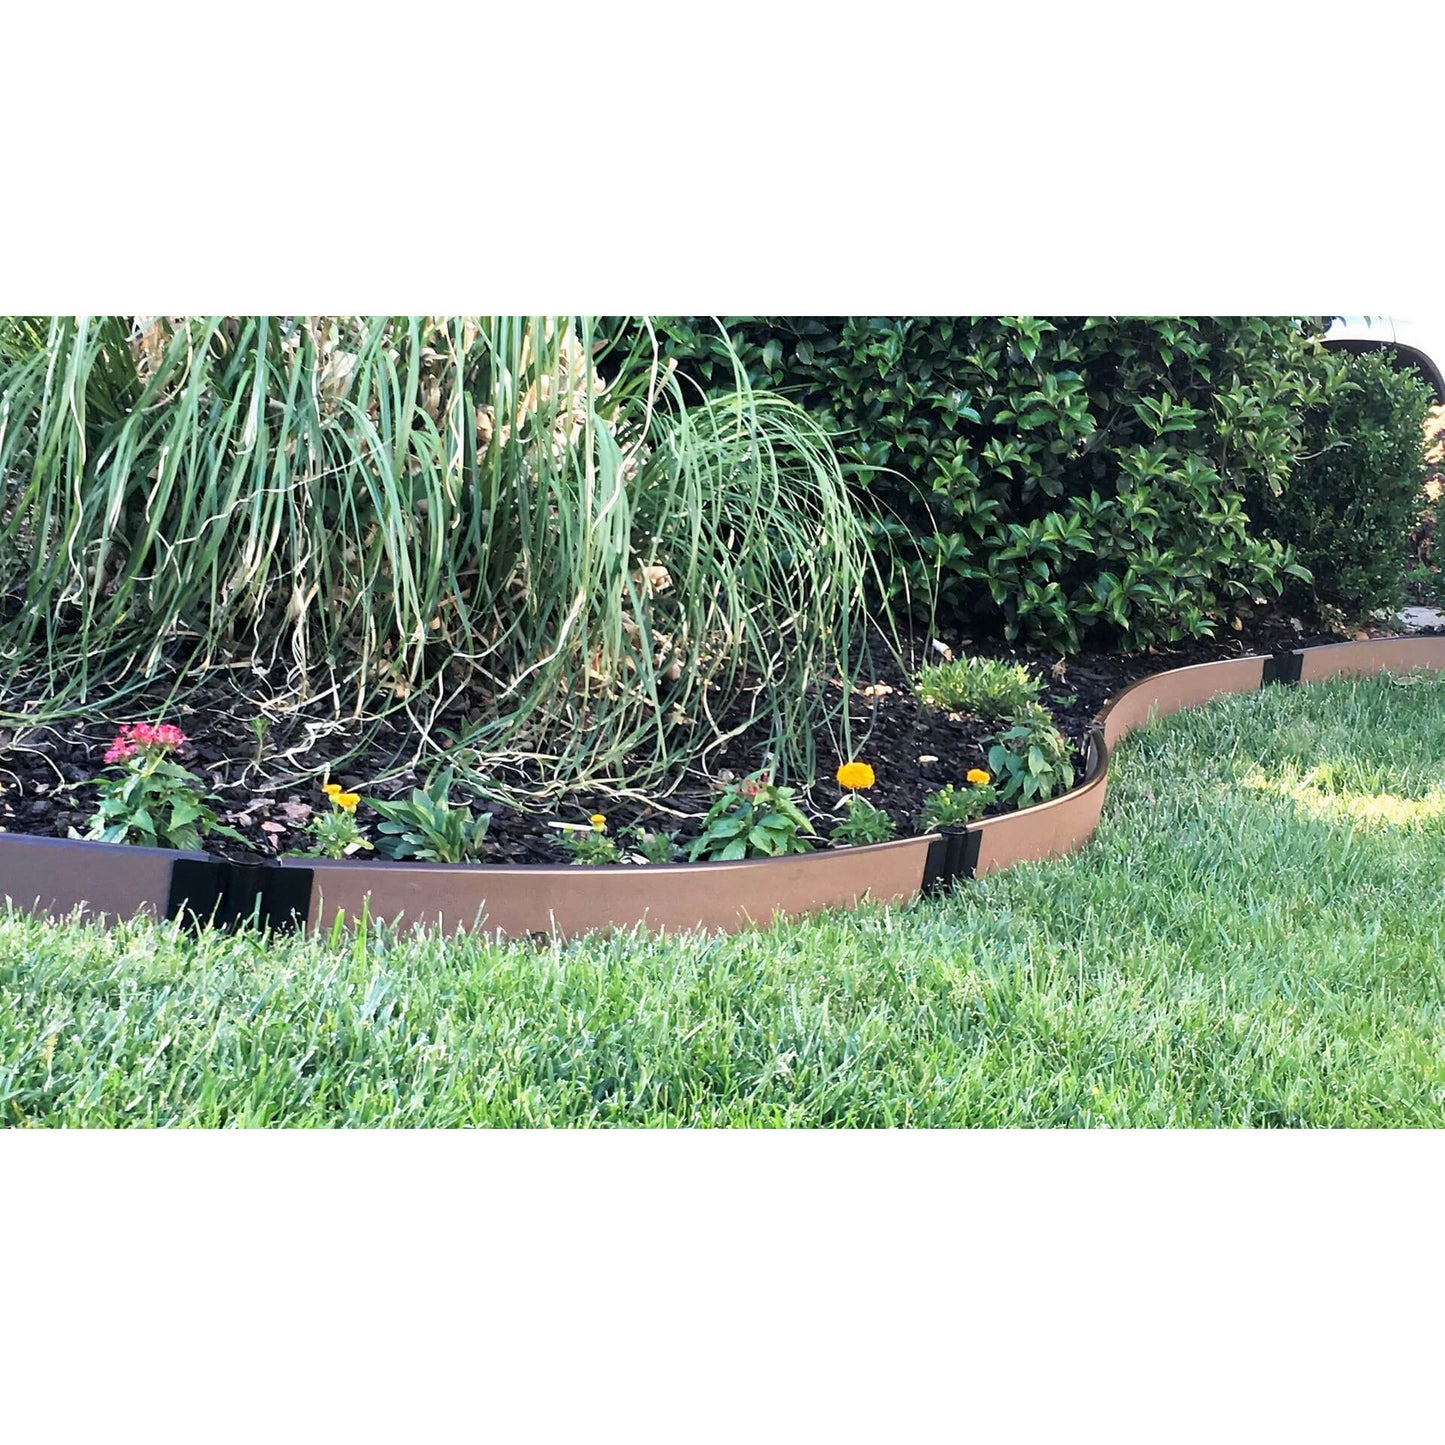 Frame It All Gardening Accessories Frame It All | Tool-Free Curved Landscape Edging Kit 64' Uptown Brown - 1" Profile 300001784